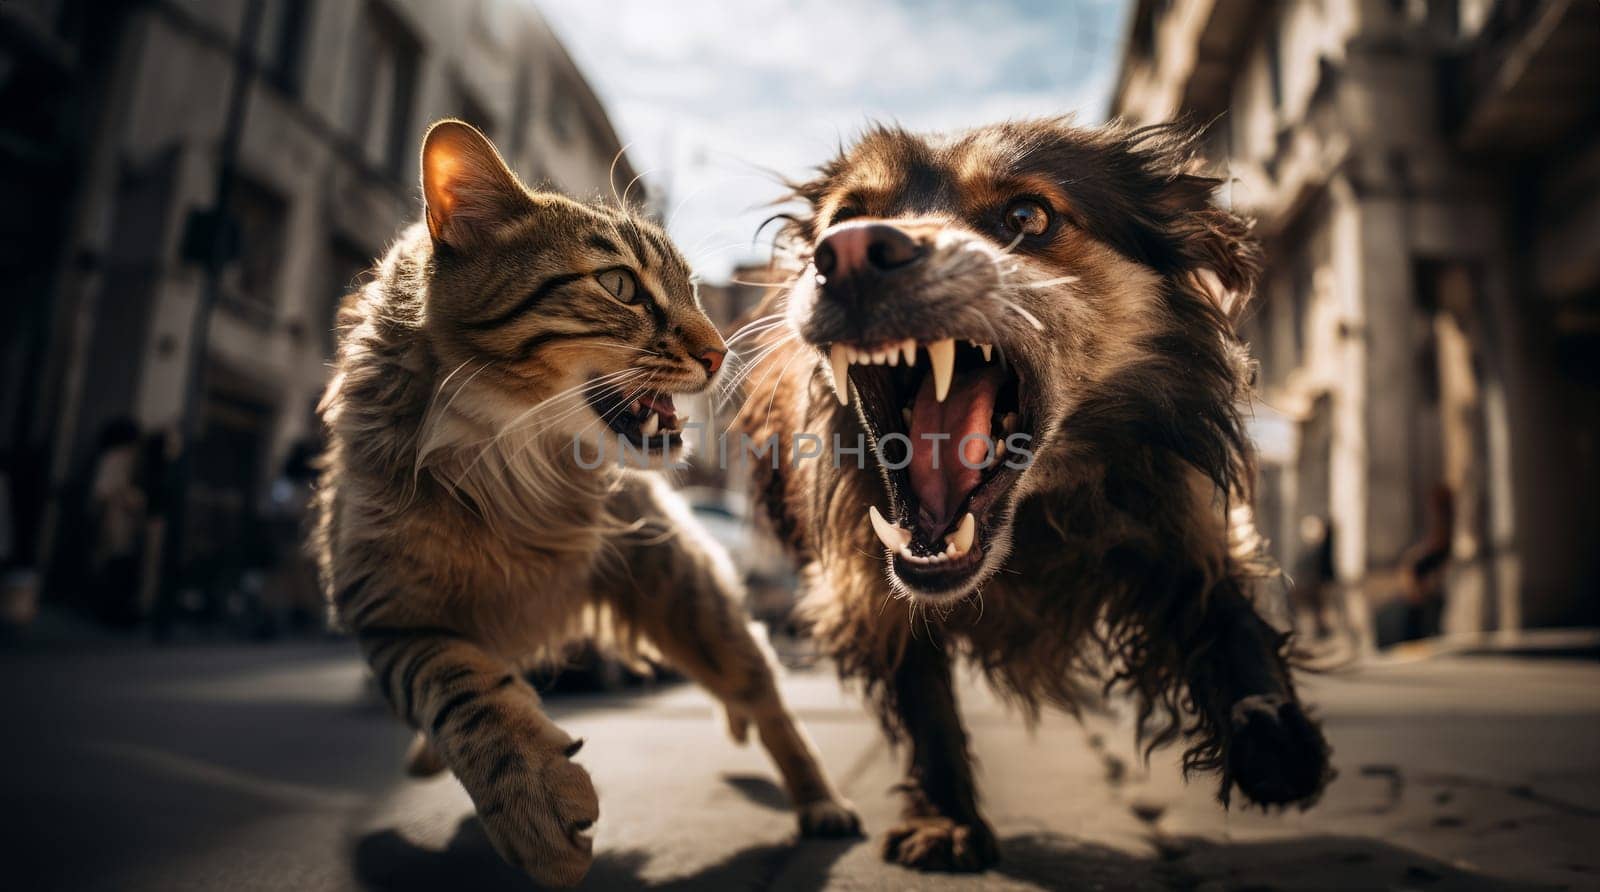 Street Showdown: Intense Encounter Between Cat and Dog Up Close.Generated image by dotshock